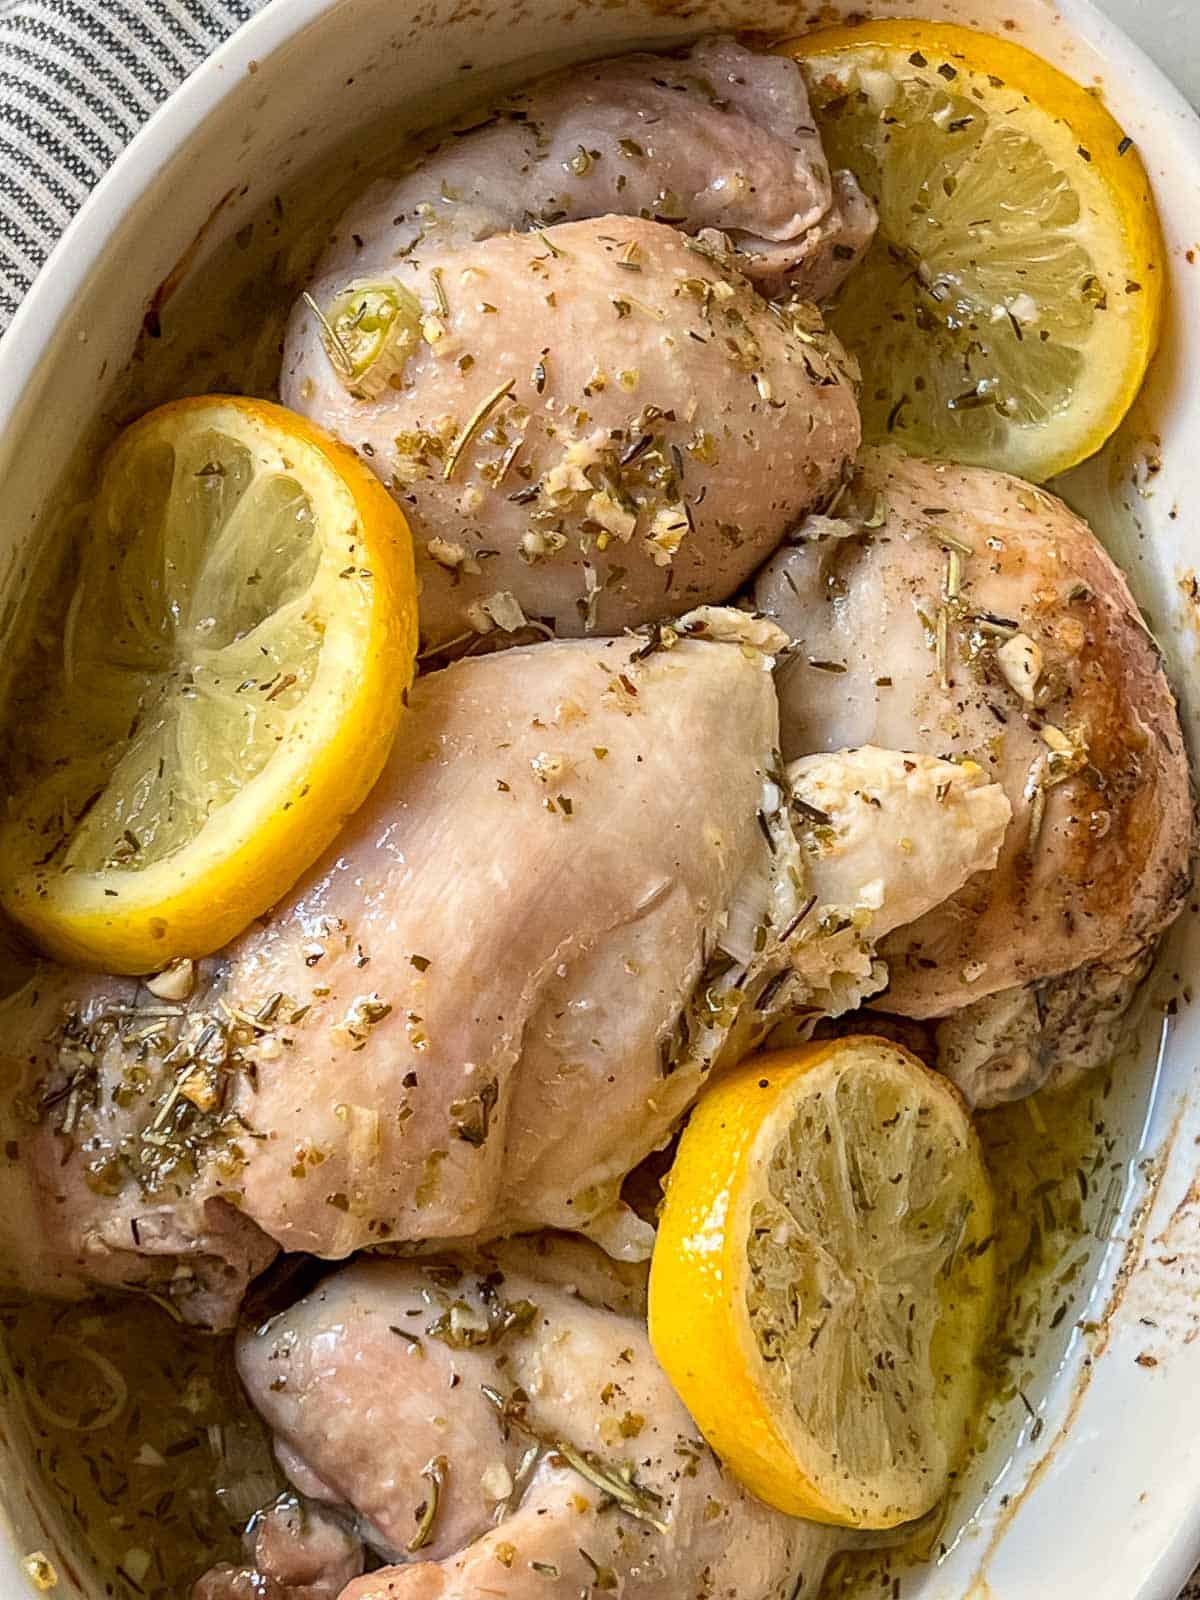 Baked chicken thighs with lemon slices in a white dish.